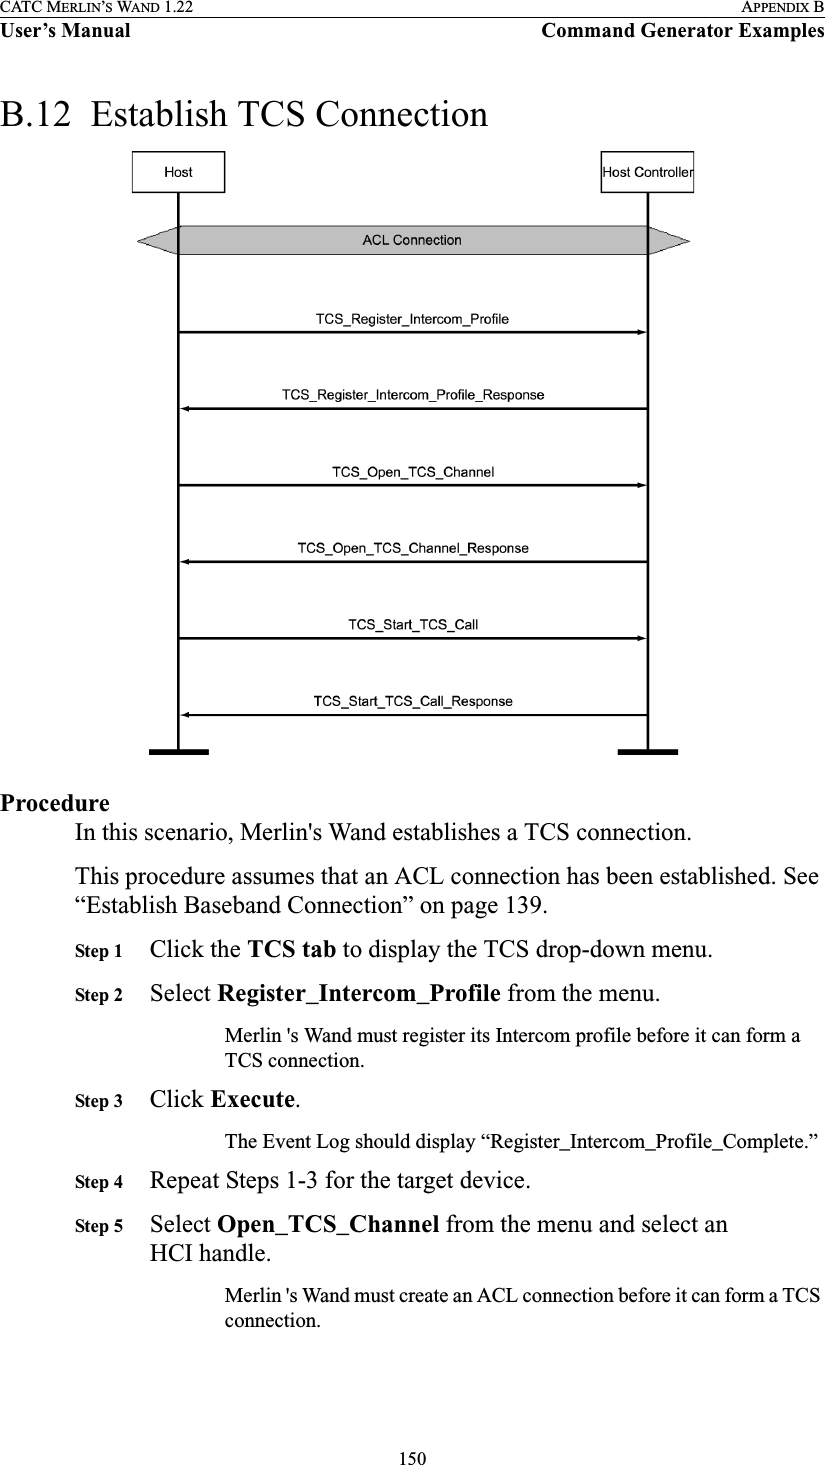 150CATC MERLIN’S WAND 1.22 APPENDIX BUser’s Manual Command Generator ExamplesB.12  Establish TCS ConnectionProcedureIn this scenario, Merlin&apos;s Wand establishes a TCS connection.This procedure assumes that an ACL connection has been established. See “Establish Baseband Connection” on page 139.Step 1 Click the TCS tab to display the TCS drop-down menu.Step 2 Select Register_Intercom_Profile from the menu.Merlin &apos;s Wand must register its Intercom profile before it can form a TCS connection.Step 3 Click Execute.The Event Log should display “Register_Intercom_Profile_Complete.”Step 4 Repeat Steps 1-3 for the target device.Step 5 Select Open_TCS_Channel from the menu and select an HCI handle.Merlin &apos;s Wand must create an ACL connection before it can form a TCS connection.